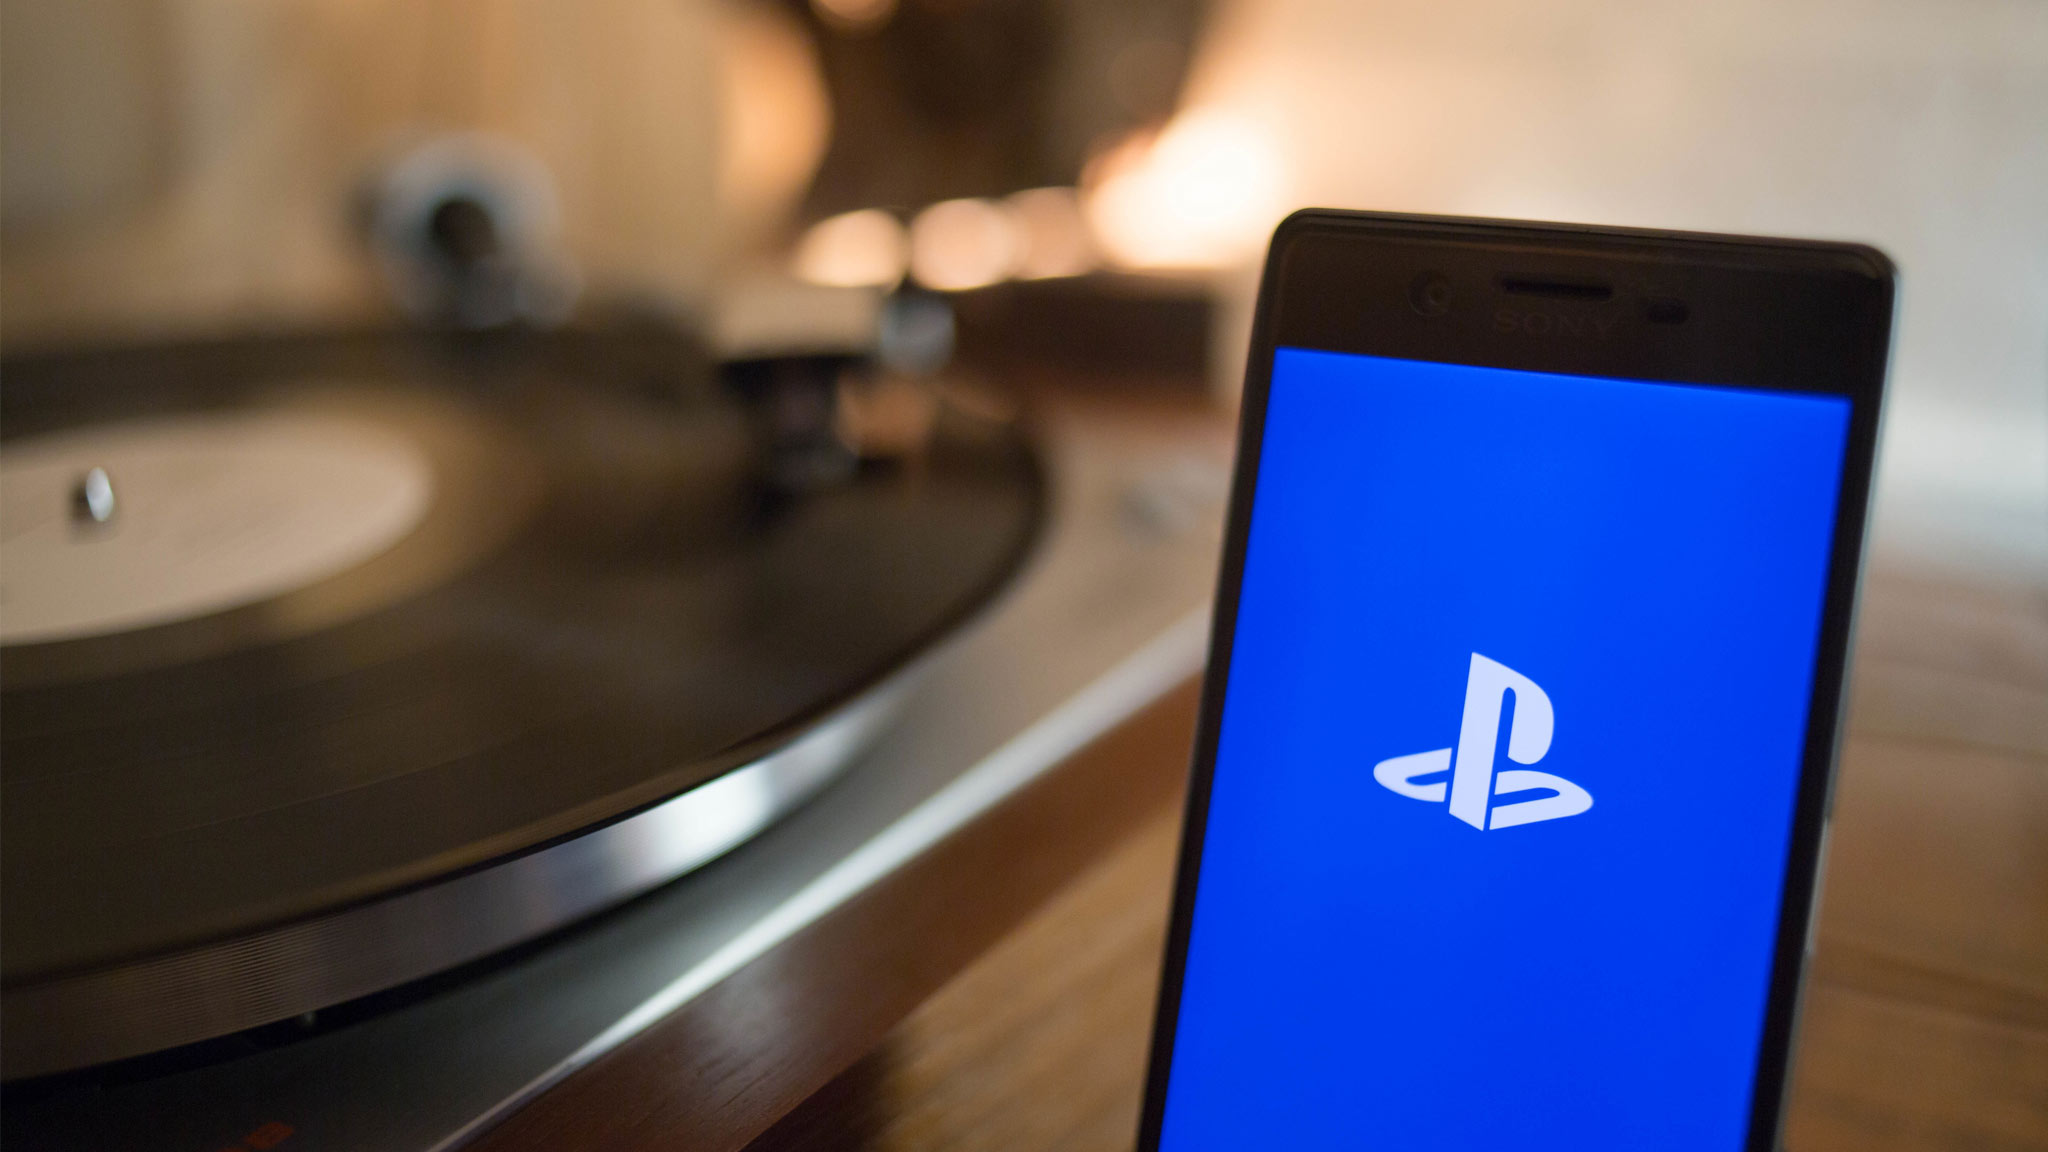 PlayStation: popular franchises for smartphones are coming